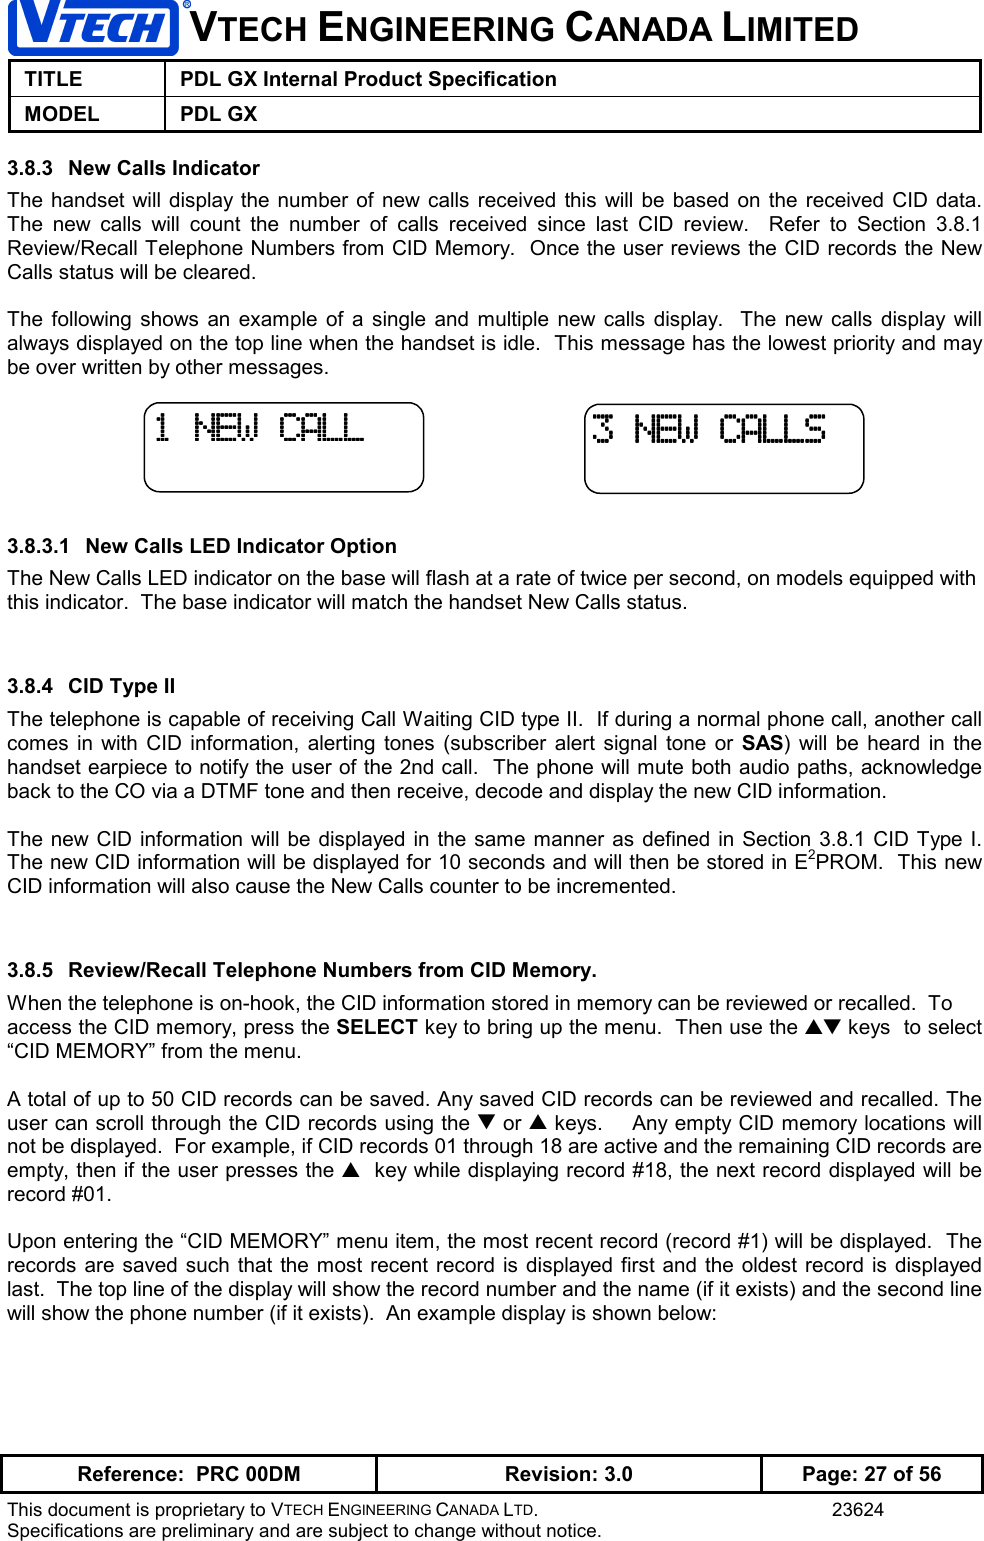 VTECH ENGINEERING CANADA LIMITEDTITLE PDL GX Internal Product SpecificationMODEL PDL GXReference:  PRC 00DM Revision: 3.0 Page: 27 of 56This document is proprietary to VTECH ENGINEERING CANADA LTD. 23624Specifications are preliminary and are subject to change without notice.3.8.3  New Calls IndicatorThe handset will display the number of new calls received this will be based on the received CID data.The new calls will count the number of calls received since last CID review.  Refer to Section 3.8.1Review/Recall Telephone Numbers from CID Memory.  Once the user reviews the CID records the NewCalls status will be cleared.The following shows an example of a single and multiple new calls display.  The new calls display willalways displayed on the top line when the handset is idle.  This message has the lowest priority and maybe over written by other messages.3.8.3.1  New Calls LED Indicator OptionThe New Calls LED indicator on the base will flash at a rate of twice per second, on models equipped withthis indicator.  The base indicator will match the handset New Calls status.3.8.4  CID Type IIThe telephone is capable of receiving Call Waiting CID type II.  If during a normal phone call, another callcomes in with CID information, alerting tones (subscriber alert signal tone or SAS) will be heard in thehandset earpiece to notify the user of the 2nd call.  The phone will mute both audio paths, acknowledgeback to the CO via a DTMF tone and then receive, decode and display the new CID information.The new CID information will be displayed in the same manner as defined in Section 3.8.1 CID Type I.The new CID information will be displayed for 10 seconds and will then be stored in E2PROM.  This newCID information will also cause the New Calls counter to be incremented.3.8.5  Review/Recall Telephone Numbers from CID Memory.When the telephone is on-hook, the CID information stored in memory can be reviewed or recalled.  Toaccess the CID memory, press the SELECT key to bring up the menu.  Then use the ▲▼ keys  to select“CID MEMORY” from the menu.A total of up to 50 CID records can be saved. Any saved CID records can be reviewed and recalled. Theuser can scroll through the CID records using the ▼ or ▲ keys.    Any empty CID memory locations willnot be displayed.  For example, if CID records 01 through 18 are active and the remaining CID records areempty, then if the user presses the ▲  key while displaying record #18, the next record displayed will berecord #01.Upon entering the “CID MEMORY” menu item, the most recent record (record #1) will be displayed.  Therecords are saved such that the most recent record is displayed first and the oldest record is displayedlast.  The top line of the display will show the record number and the name (if it exists) and the second linewill show the phone number (if it exists).  An example display is shown below:3 NEW CALLS3 NEW CALLS3 NEW CALLS3 NEW CALLS1 NEW CALL1 NEW CALL1 NEW CALL1 NEW CALL